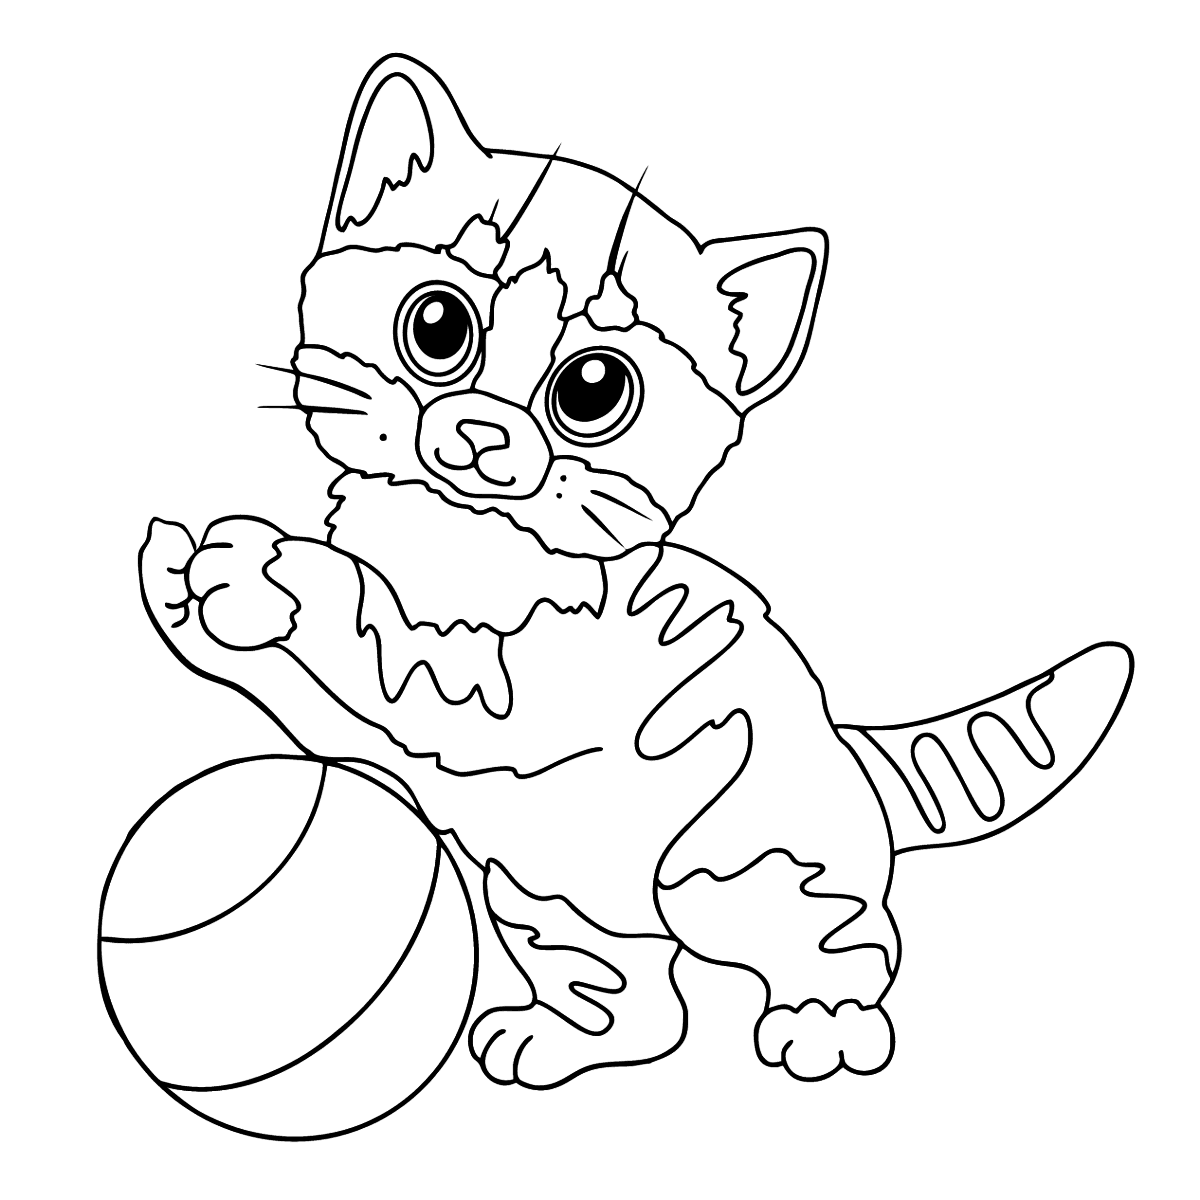 Funny Kitten coloring page ♥ Online and Print for Free!